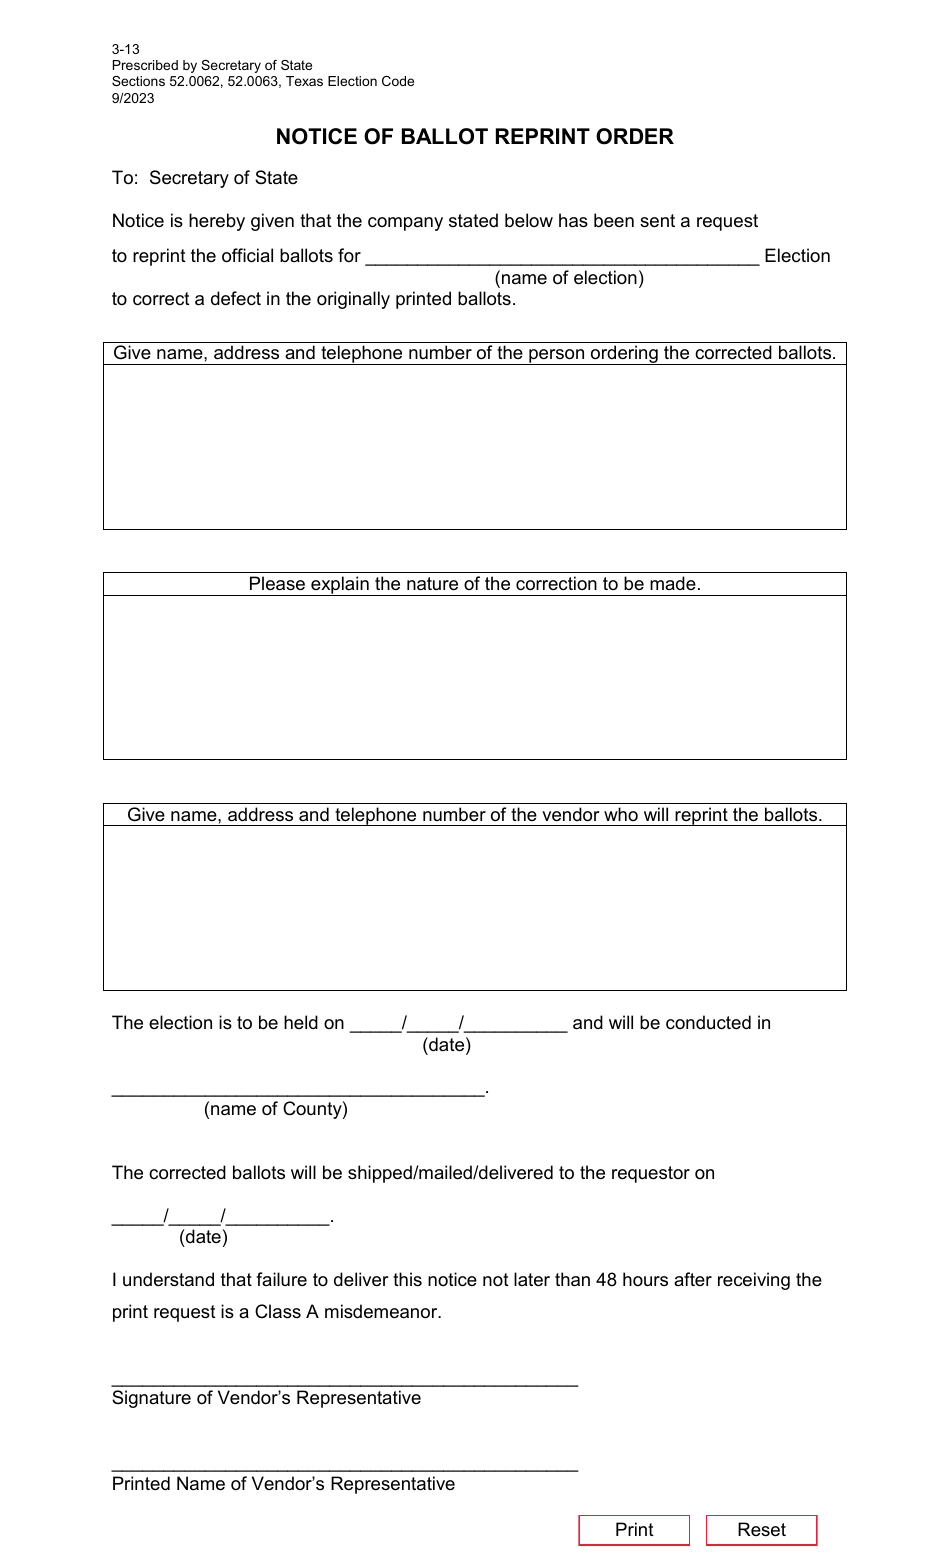 Form 3-13 Notice of Ballot Reprint Order - Texas, Page 1